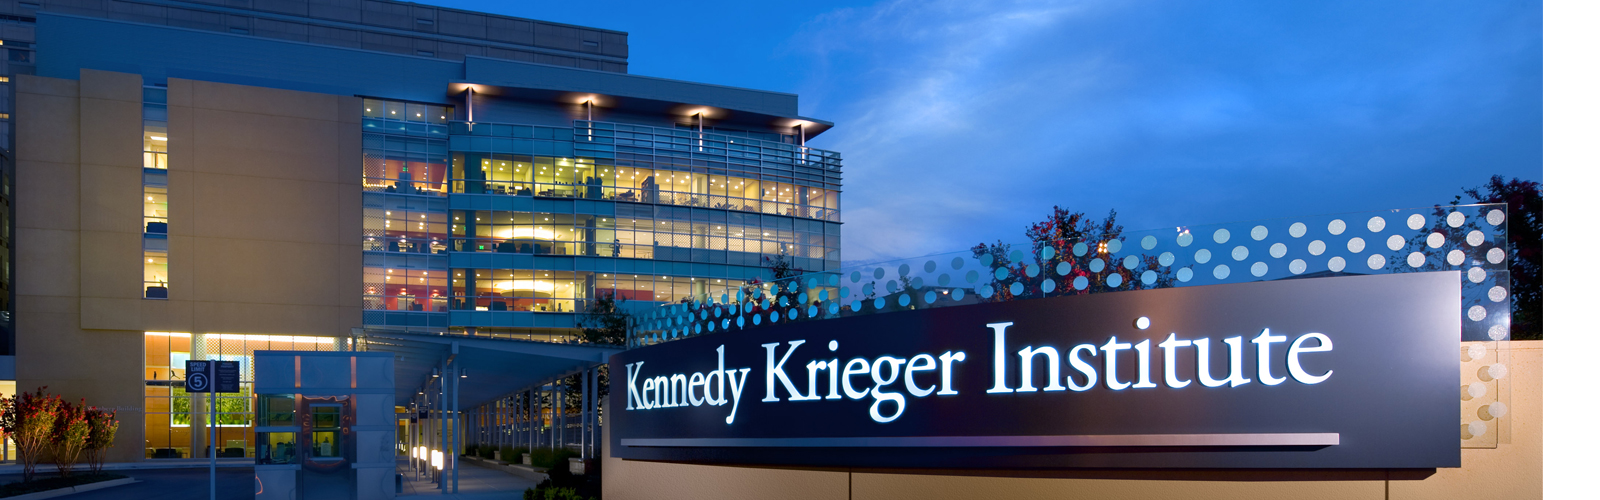 Evening view of Kennedy Krieger's 801 Building